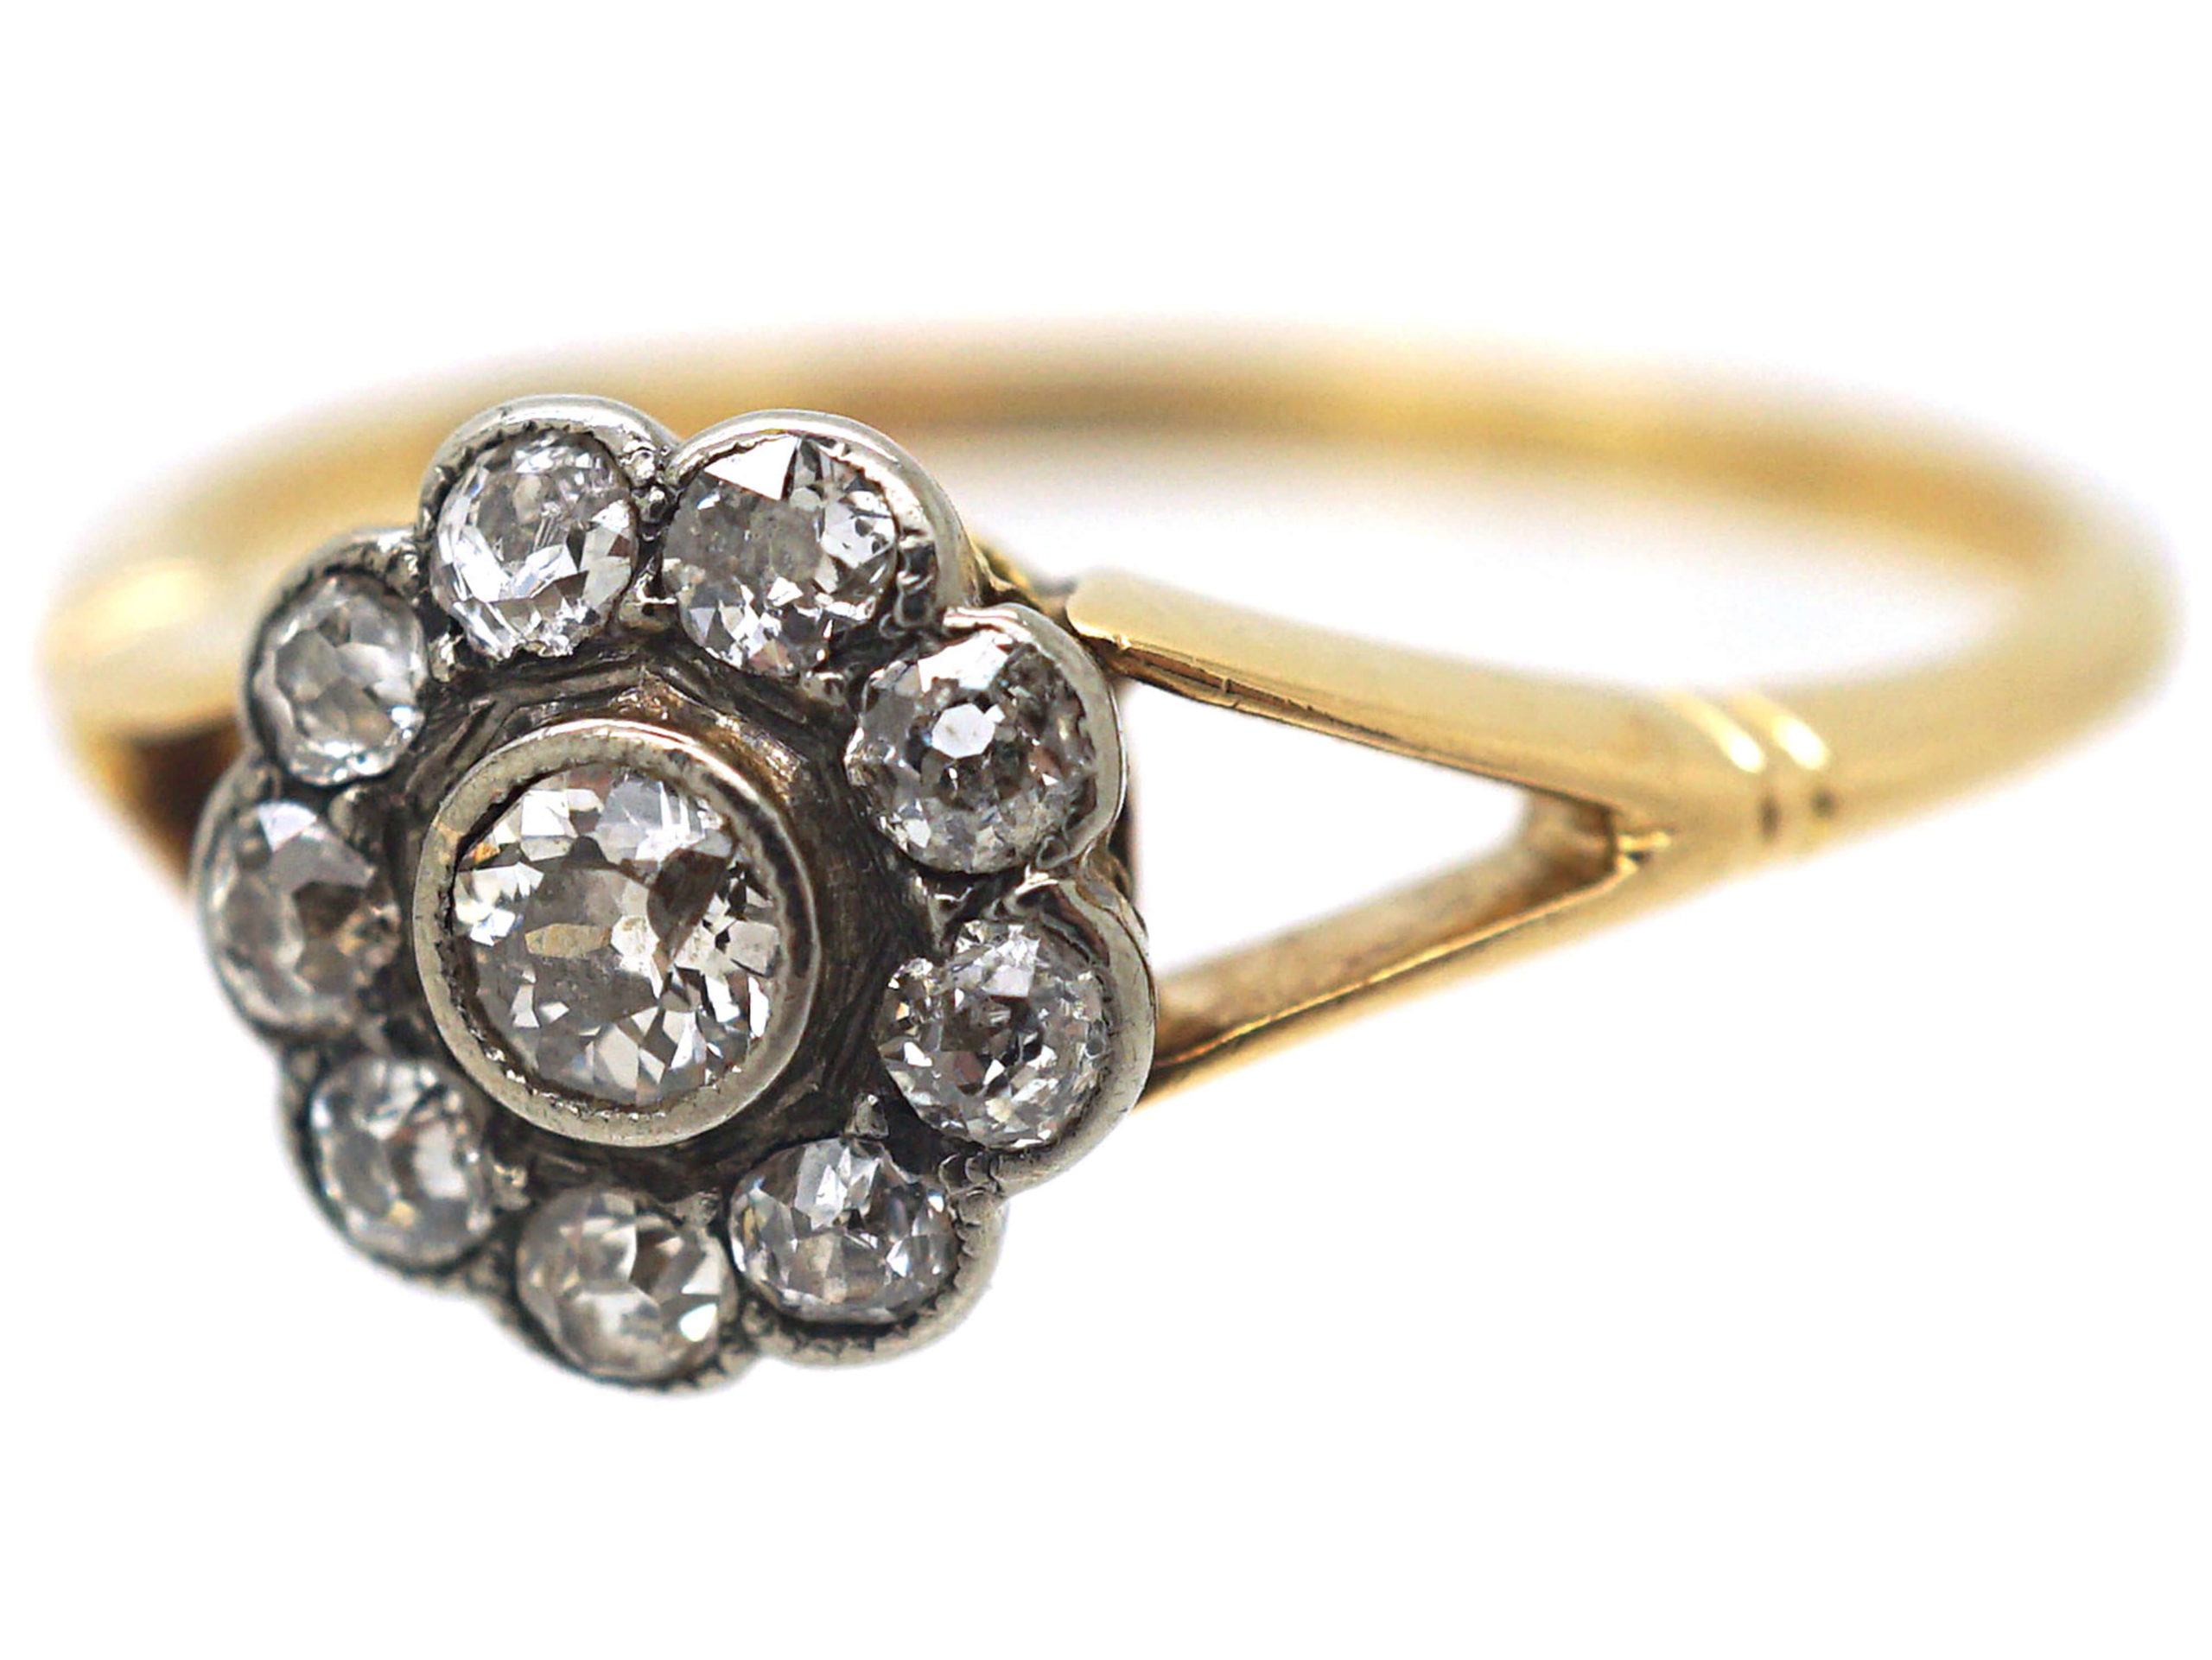 Edwardian 18ct Gold & Diamond Cluster Ring (336/O) | The Antique ...